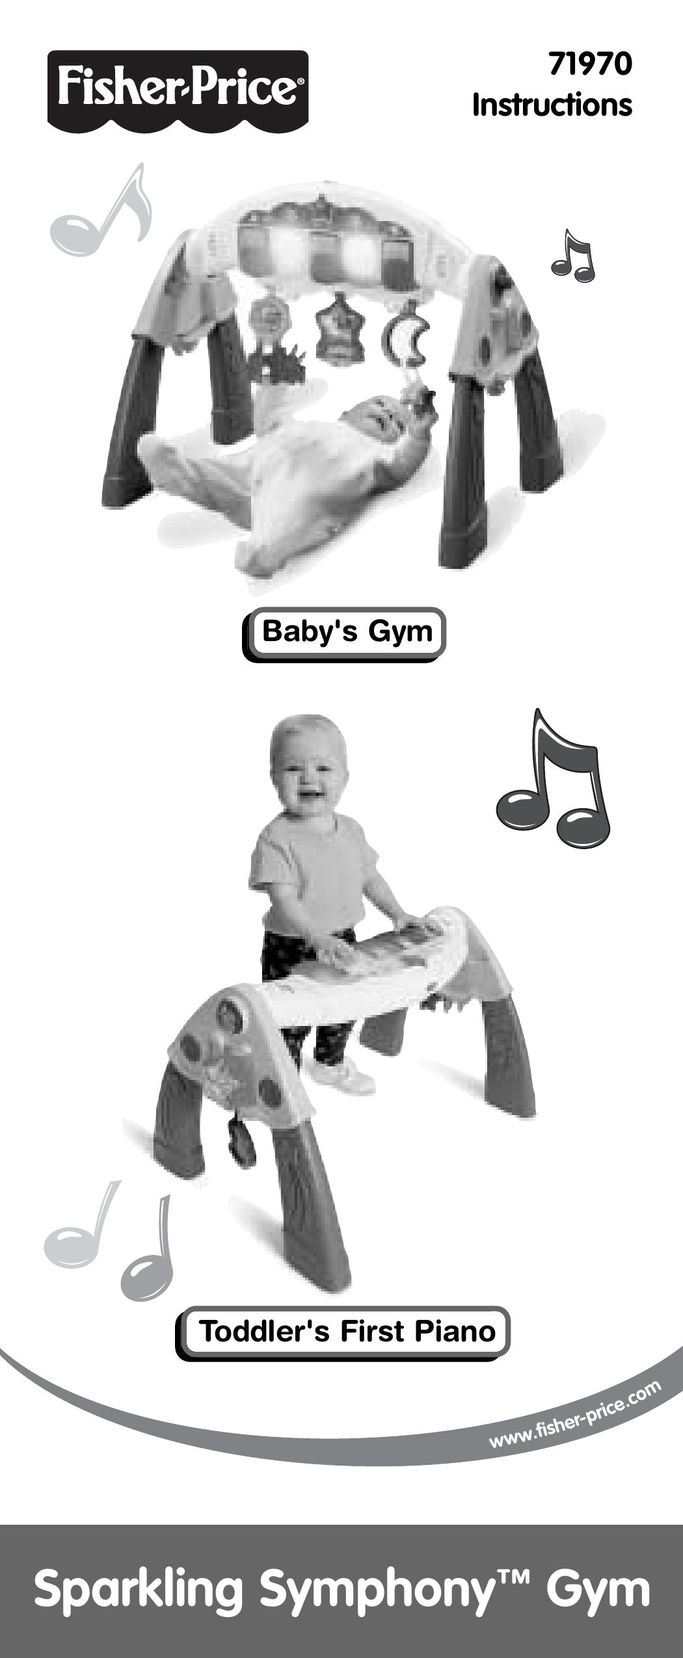 Fisher-Price 71970 Baby Gym User Manual